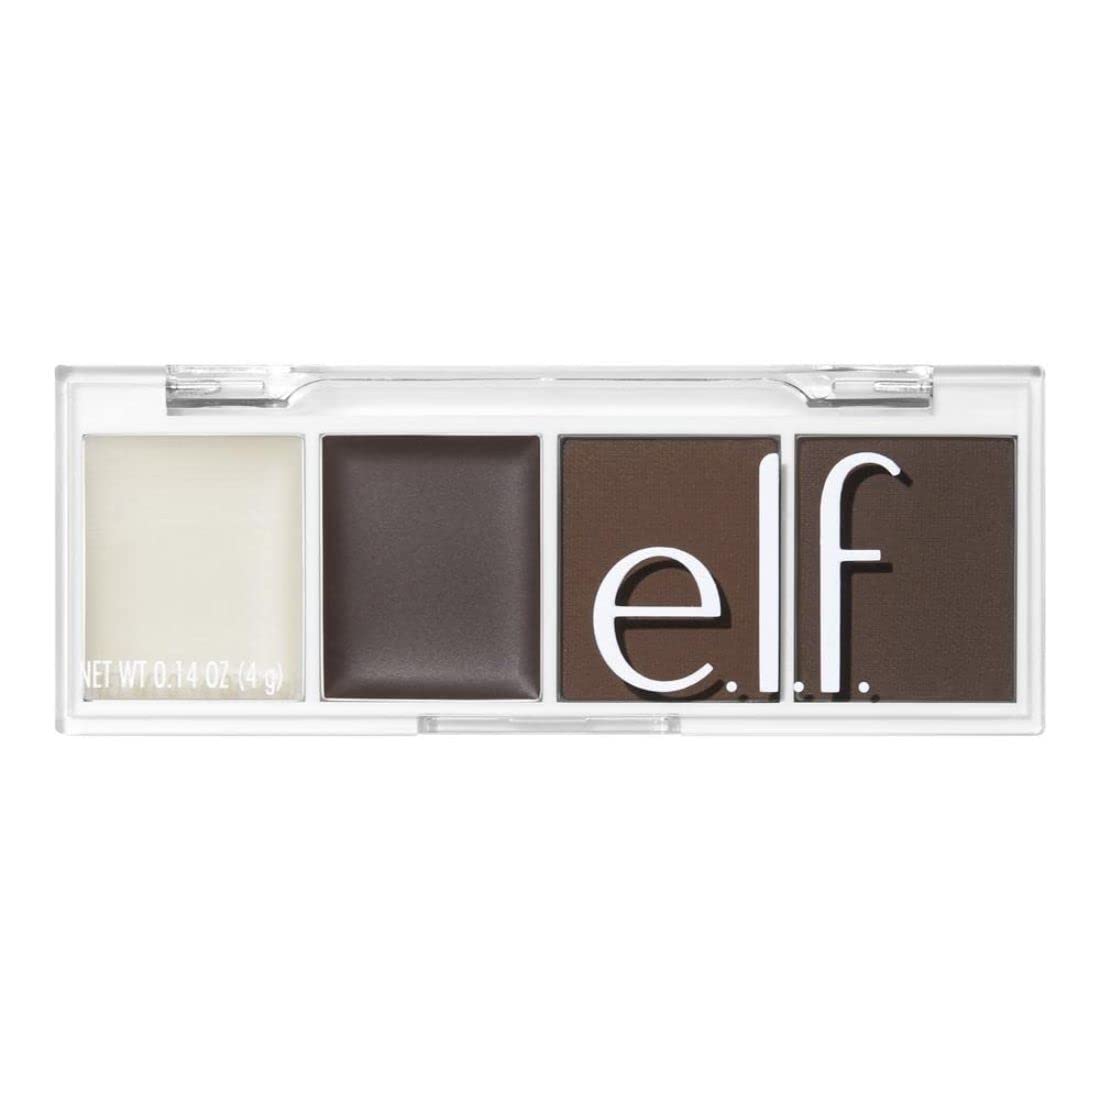 e.l.f. Bite-Size Brow, Mini Brow Quad with Ultra-Pigmented Waxes & Powders, Eyebrow Grooming & Makeup Kit, Dark Brown, 0.14